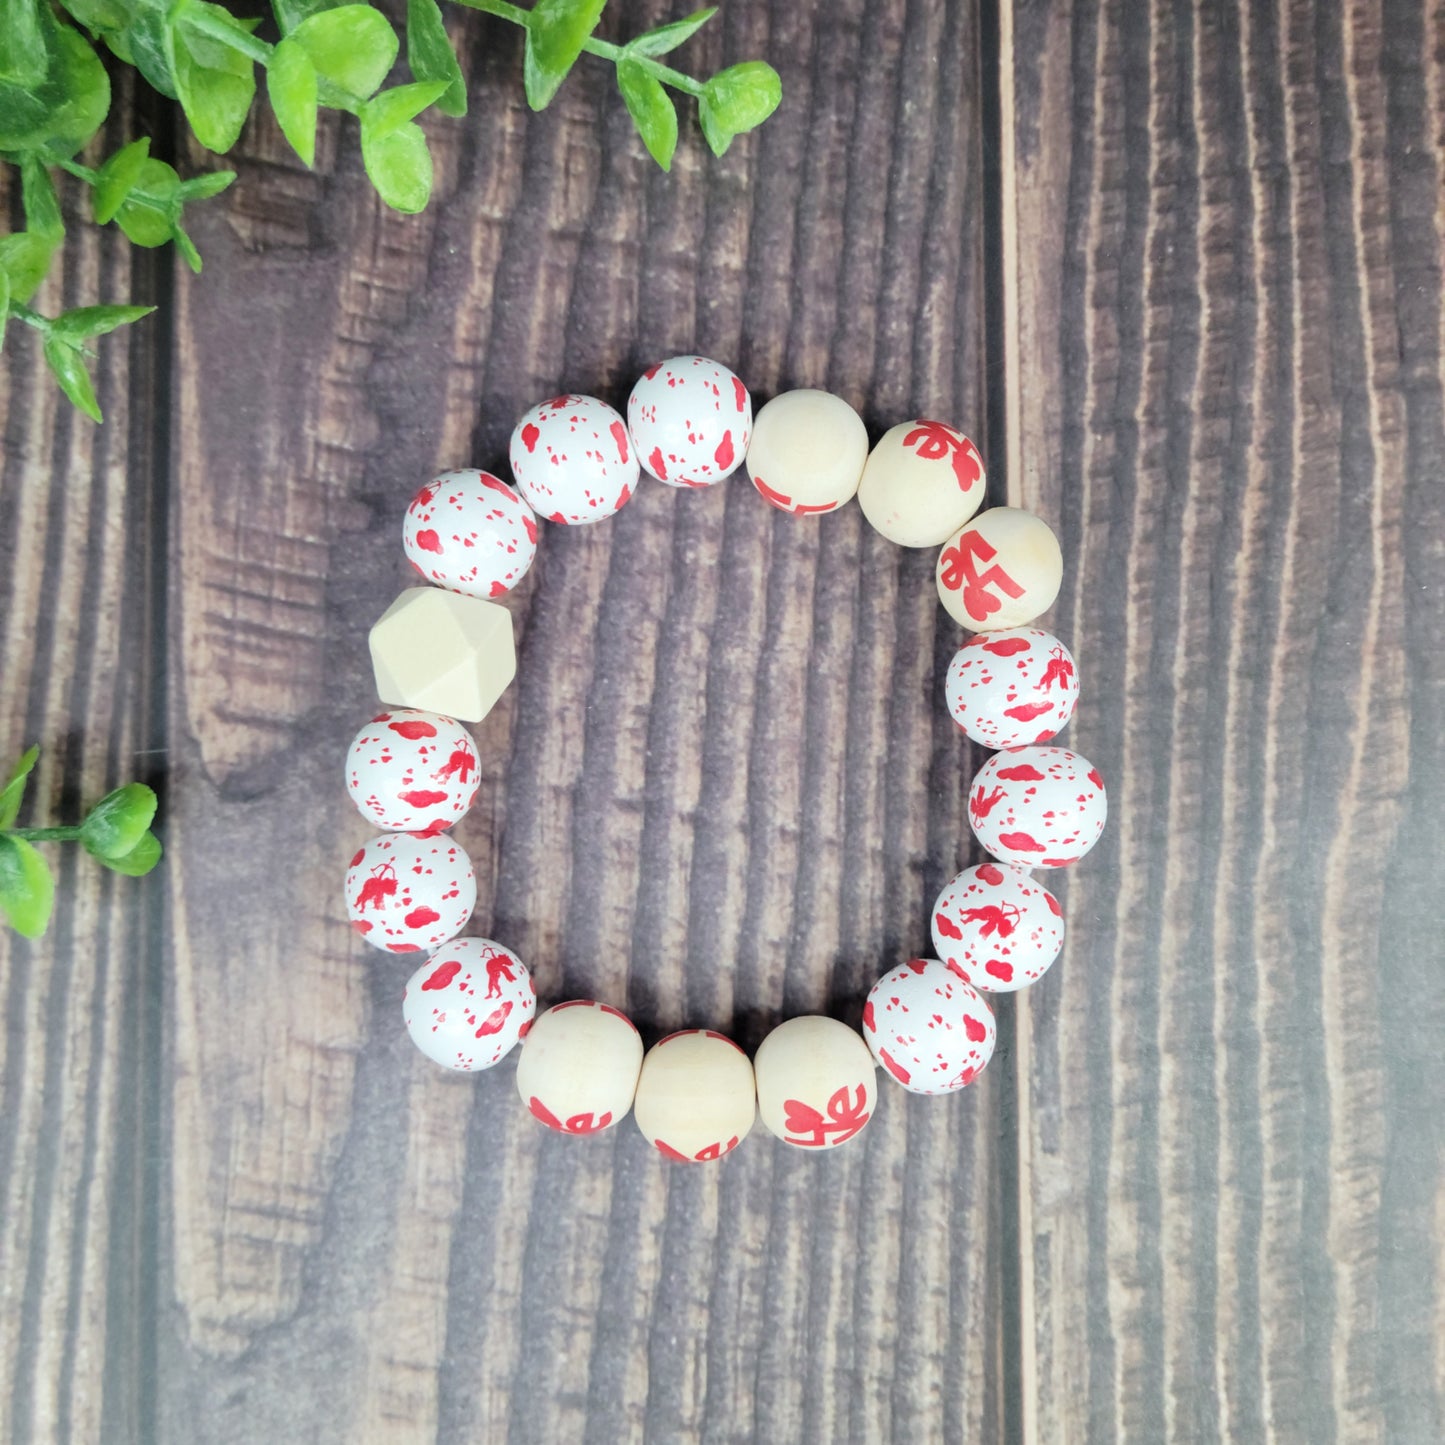 Wood Bead Keychain Bracelets - Valentine's Day Collection